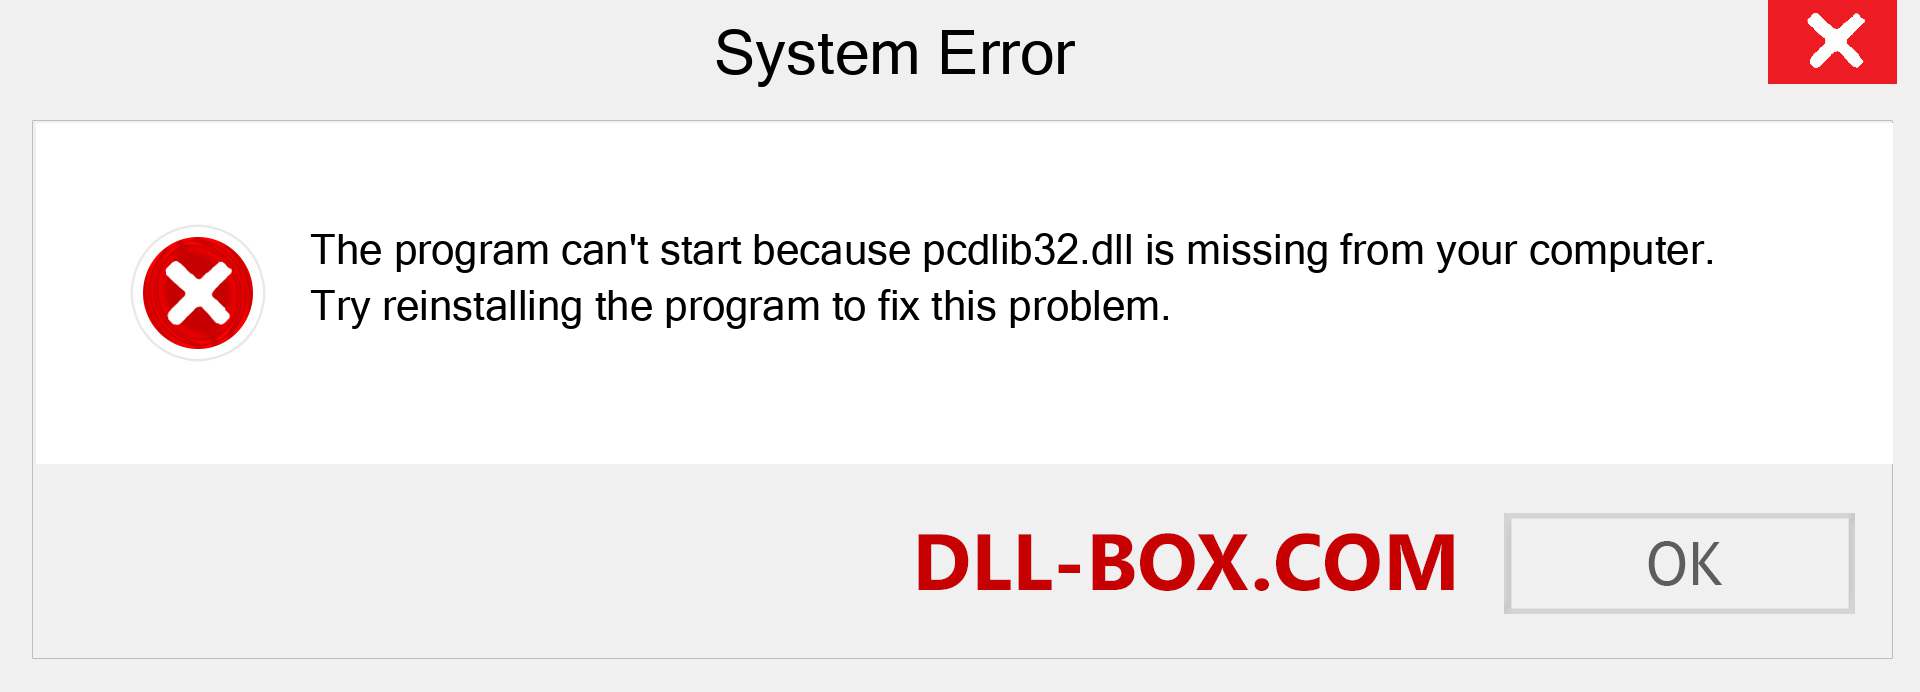  pcdlib32.dll file is missing?. Download for Windows 7, 8, 10 - Fix  pcdlib32 dll Missing Error on Windows, photos, images